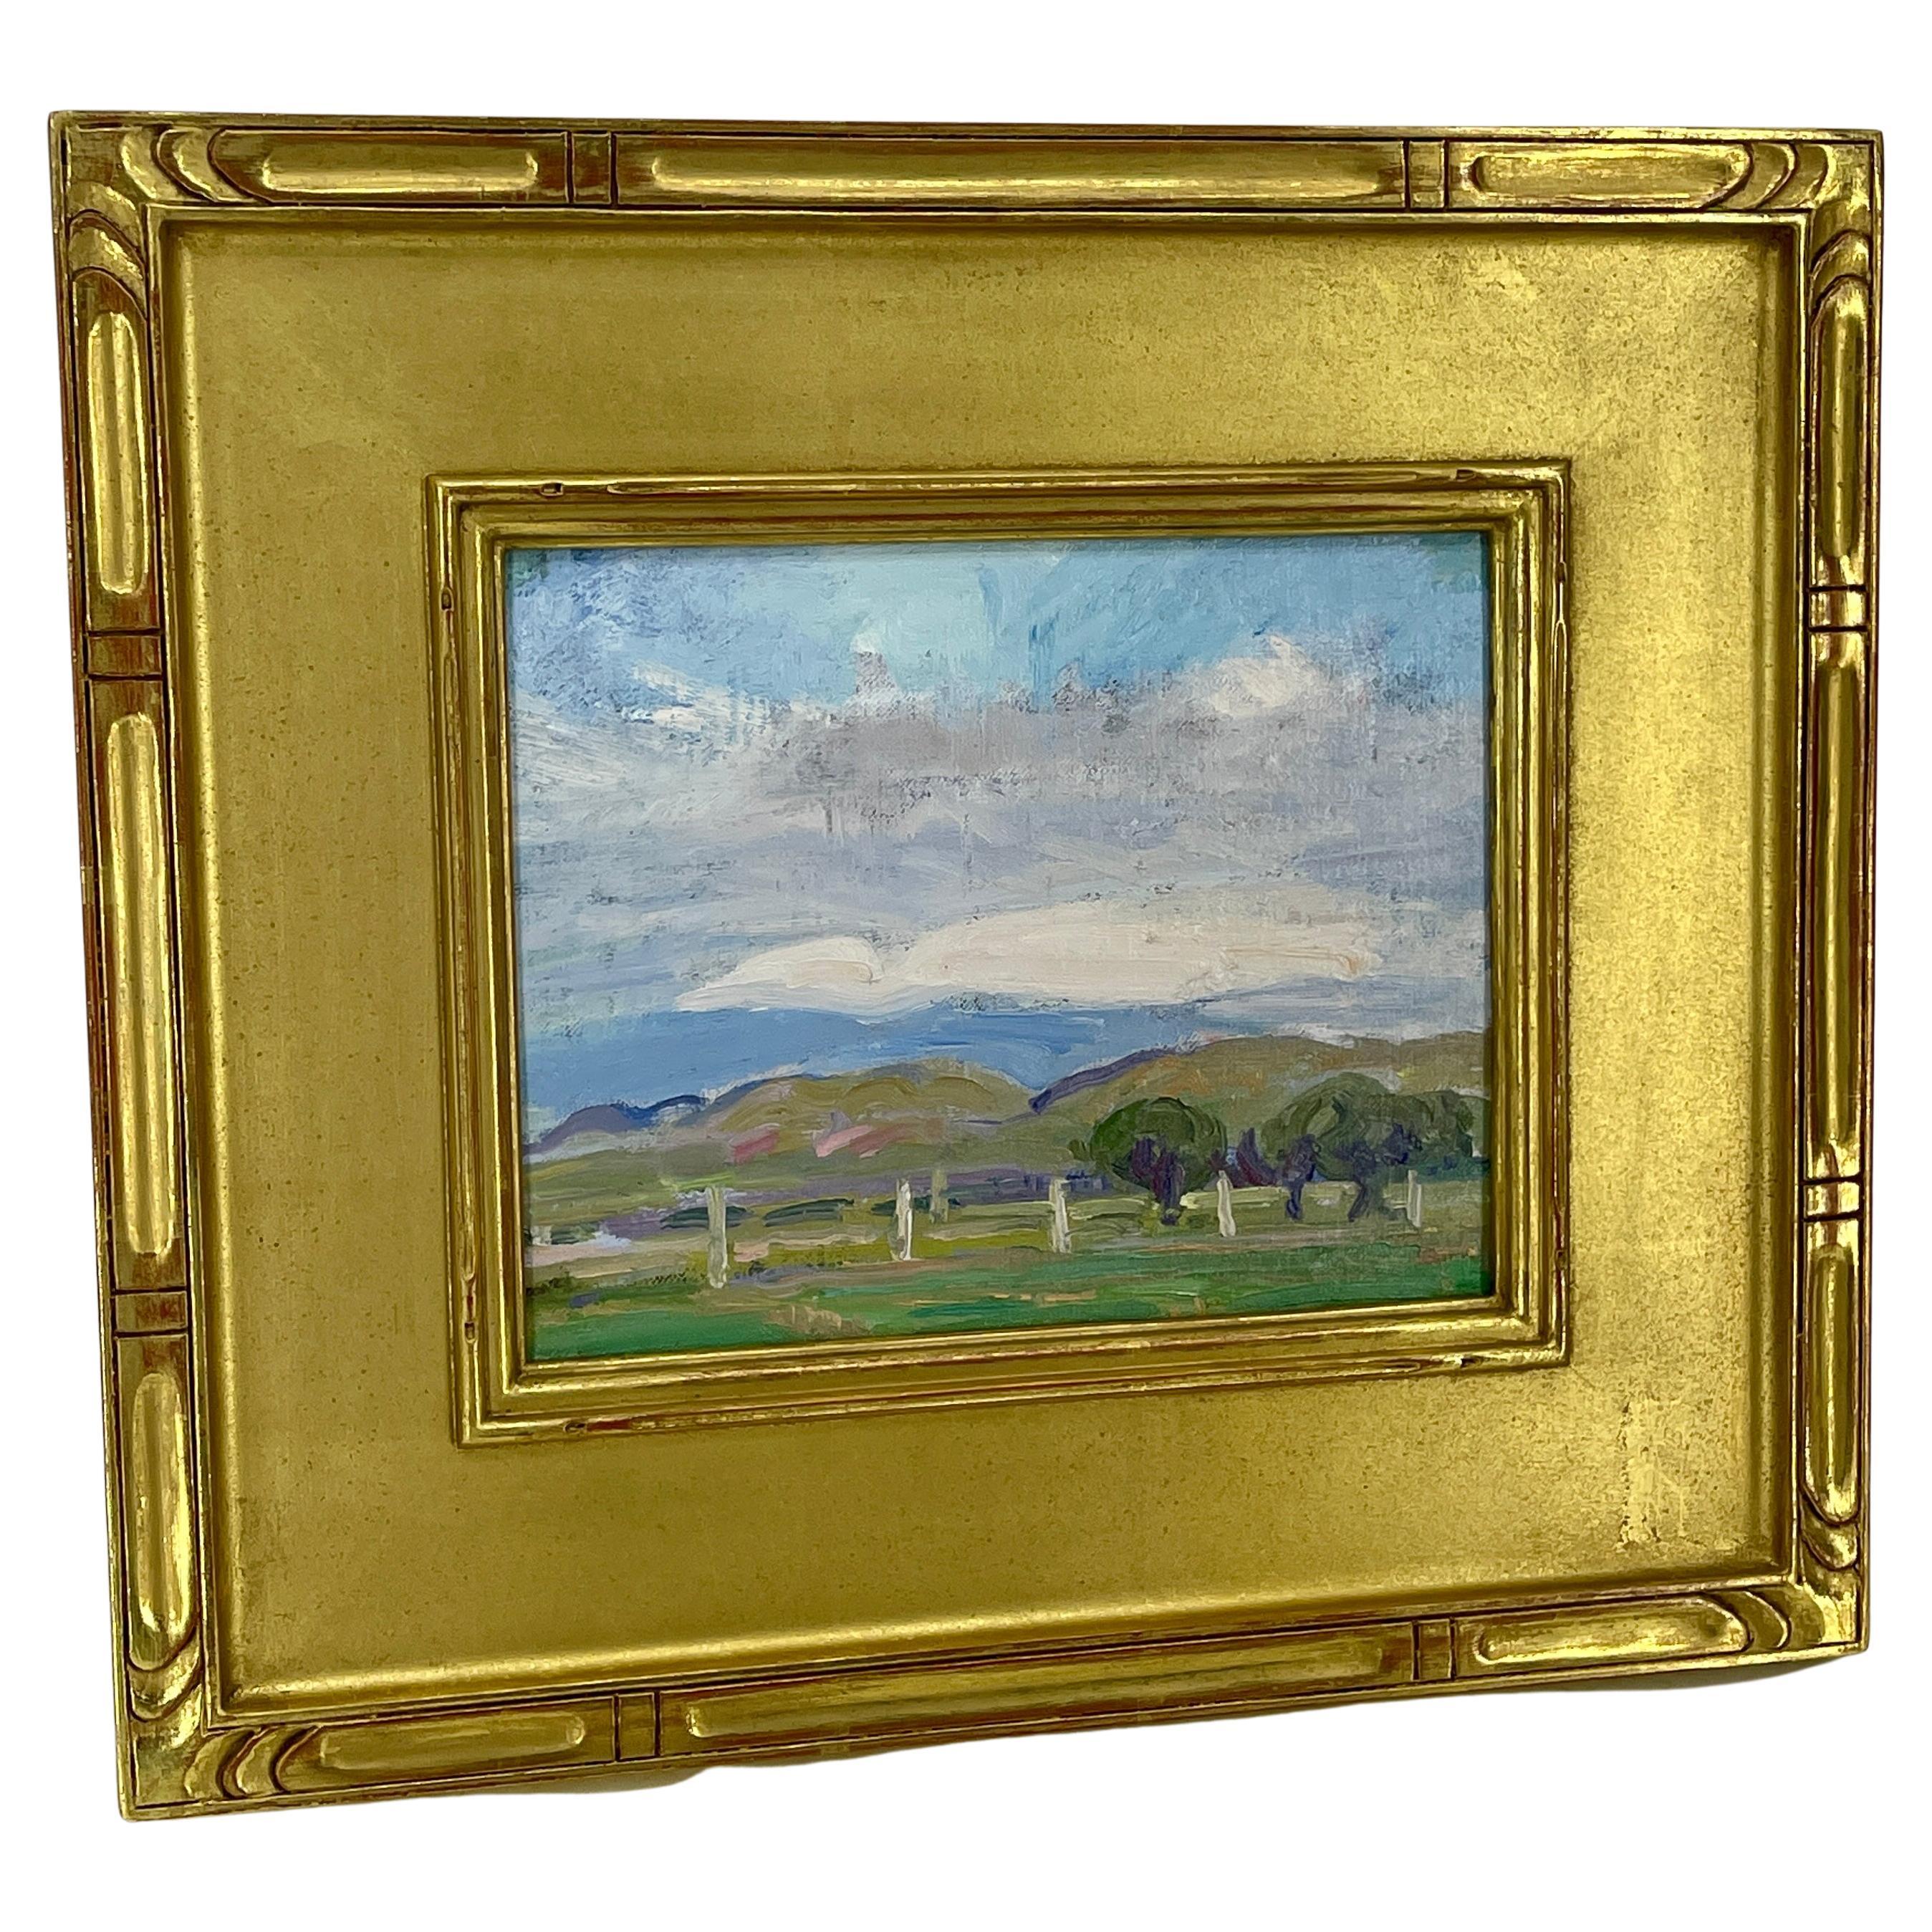 Impressionist Landscape Countryside Oil Painting on Canvas, France

Oil painting on canvas from the estate of Richard Horace Bassett (1900 - 1995). The artist studied and painted in Europe during the 1920s and 1930s, and the offering here shows the